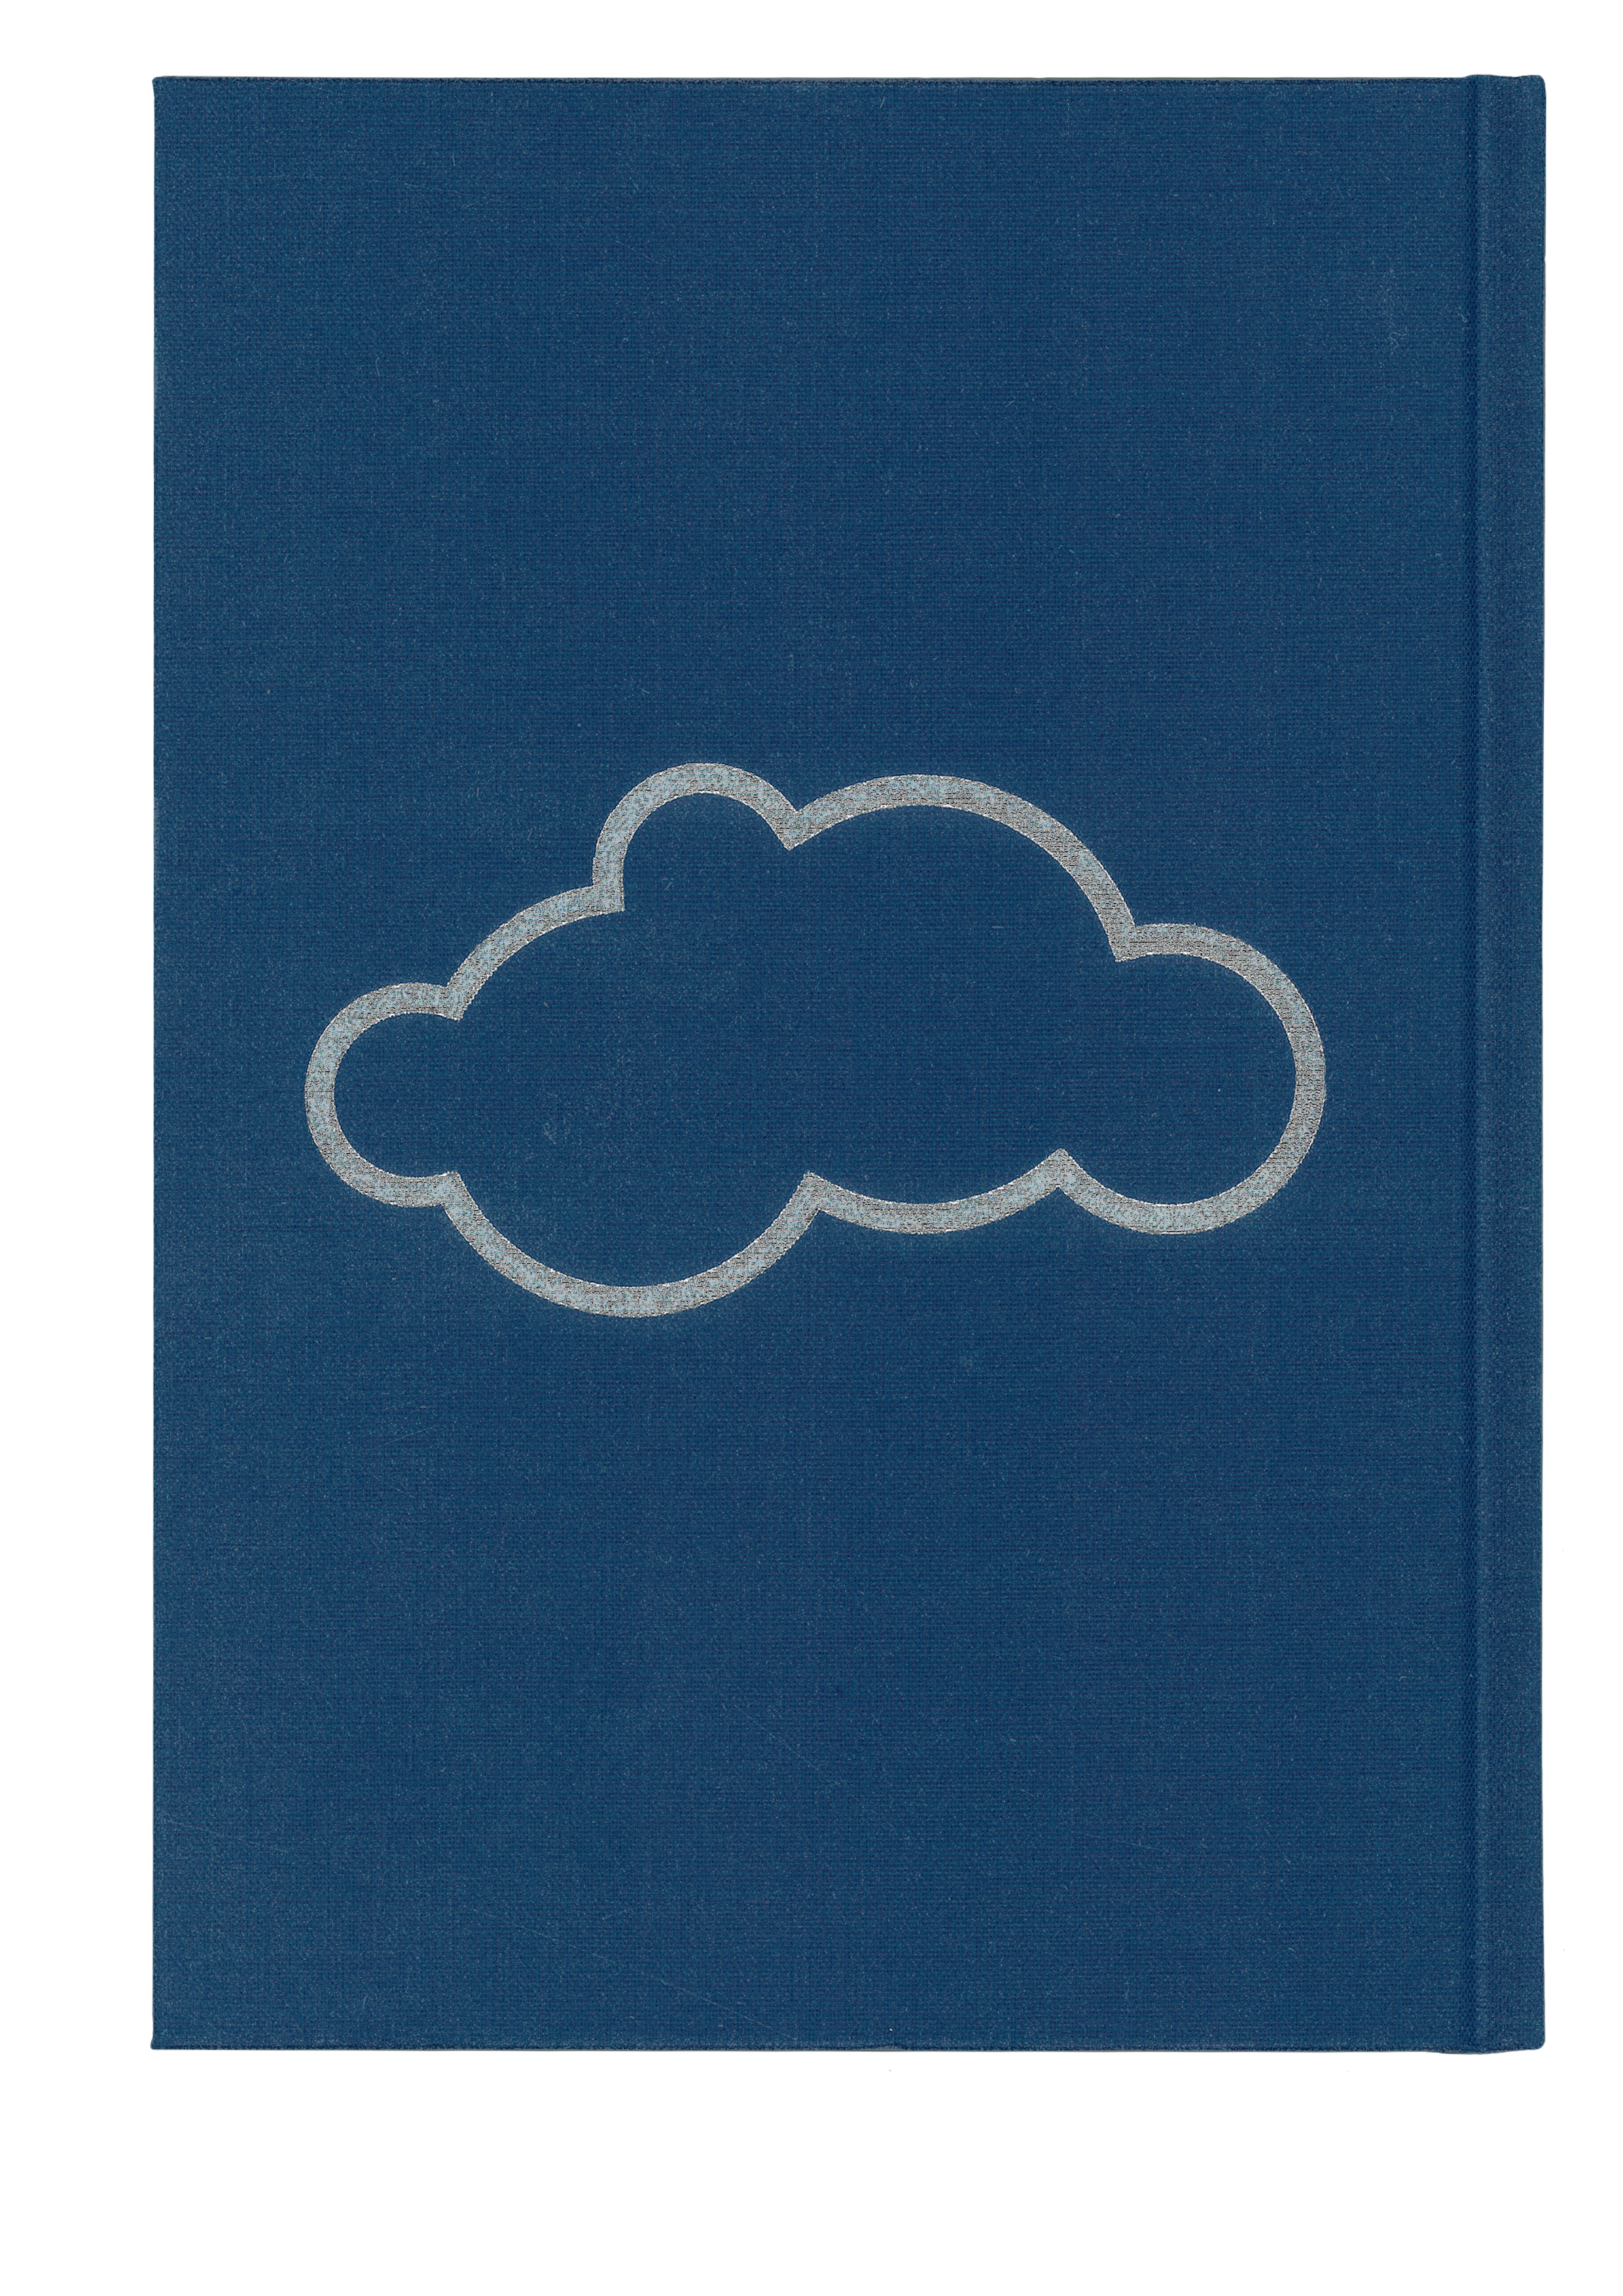 1MAGRITTE_BCKCOVER_20copy.png